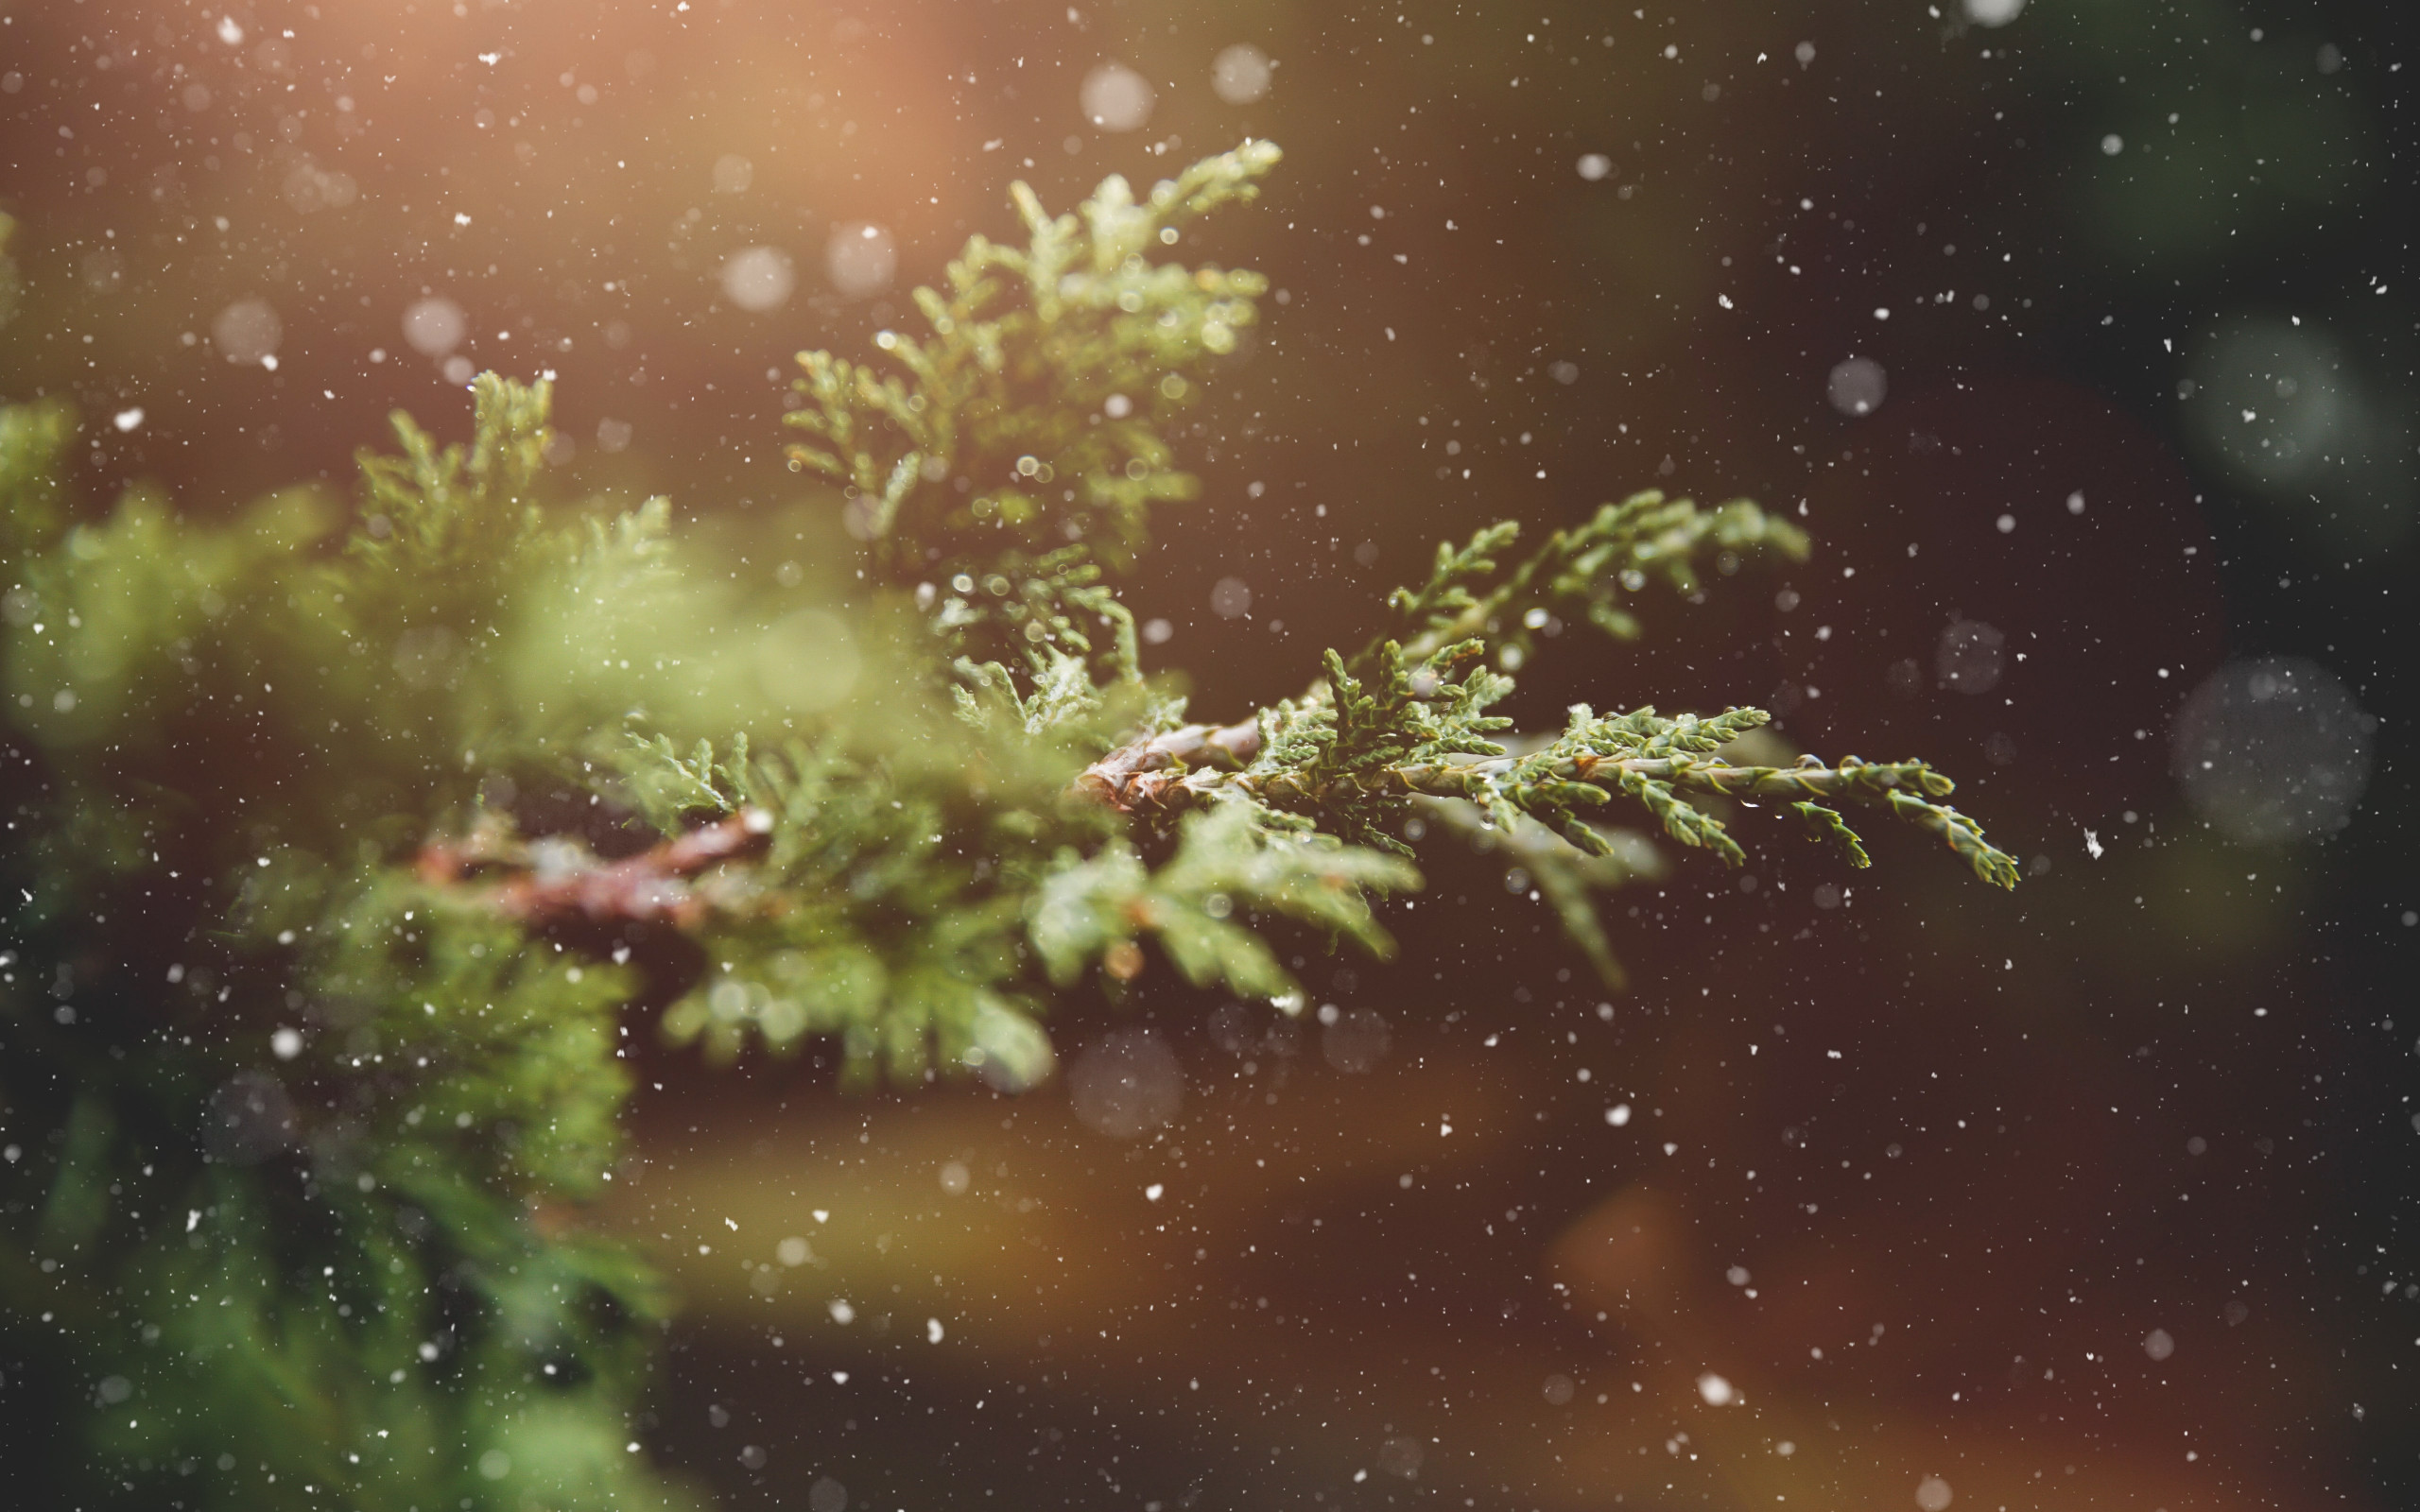 Snowflakes over the pine branch wallpaper 2560x1600